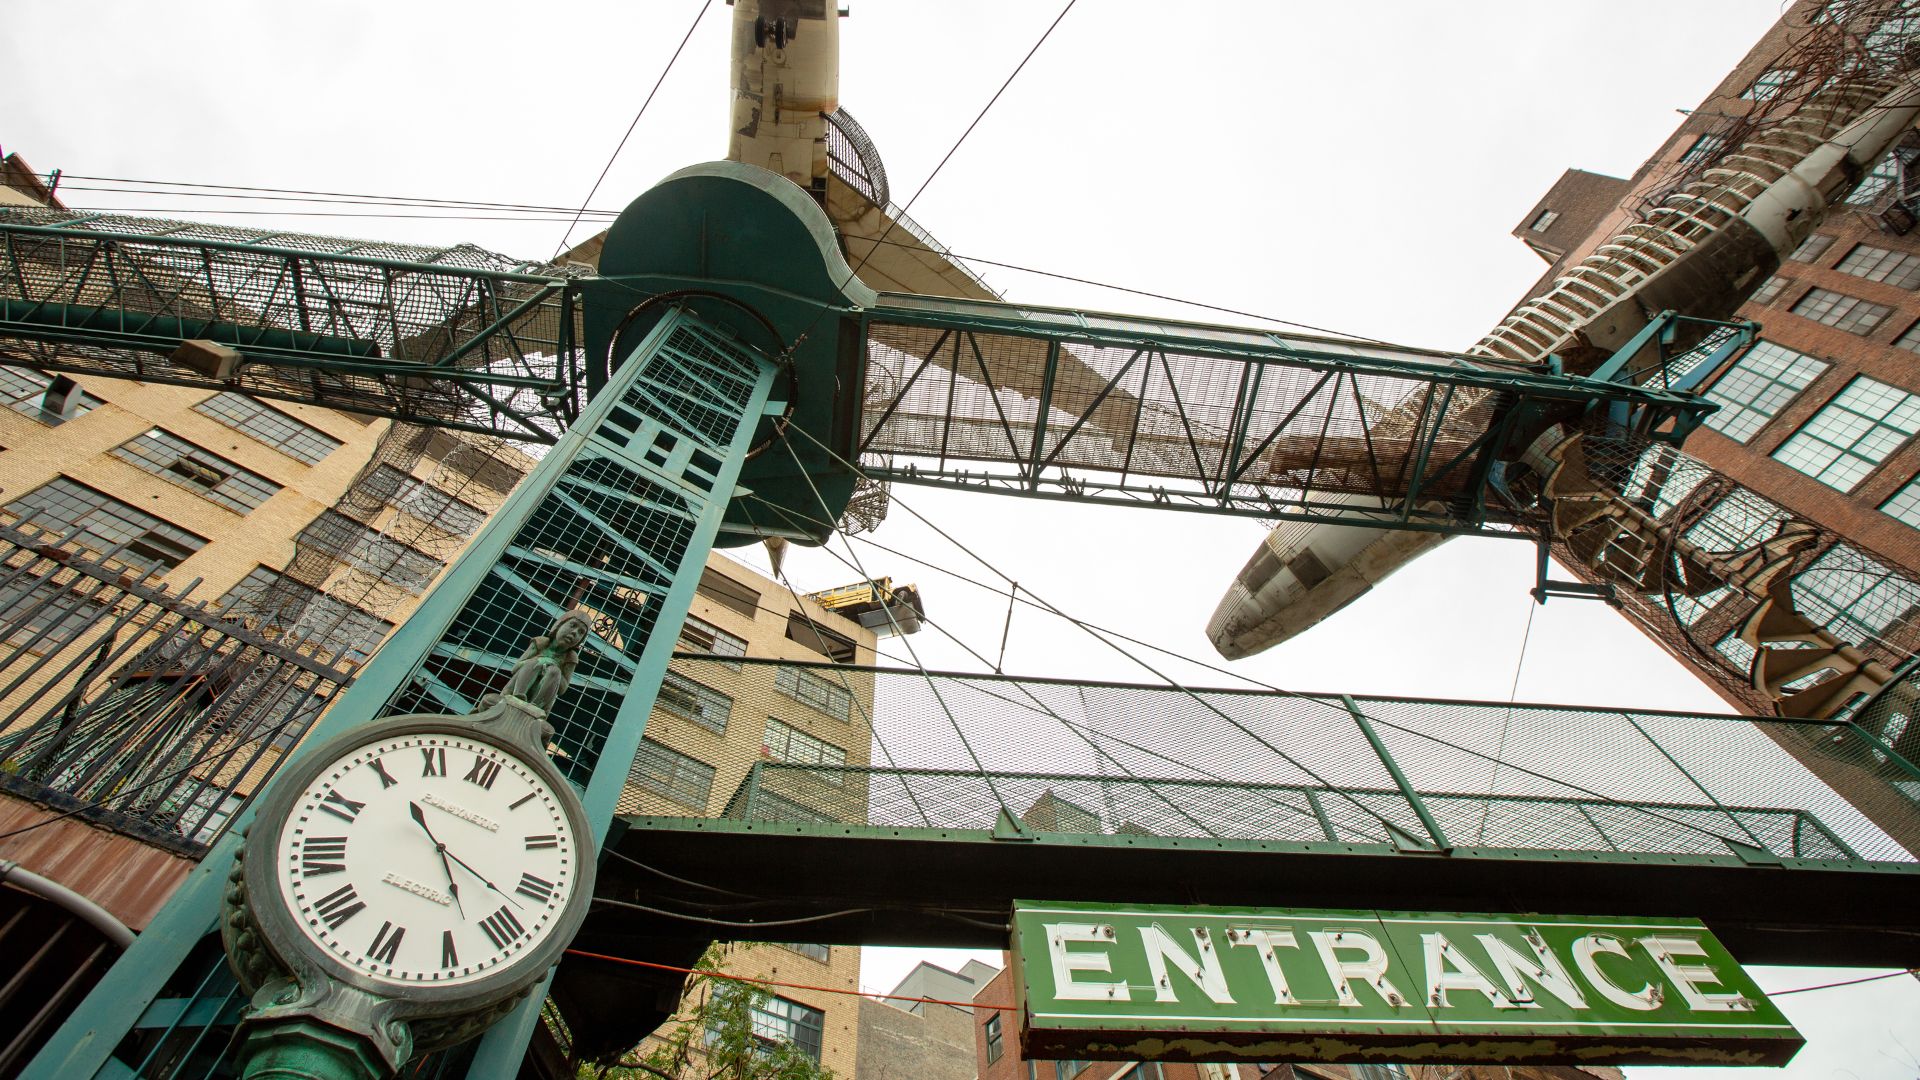 City Museum is made of repurposed objects like airplanes.